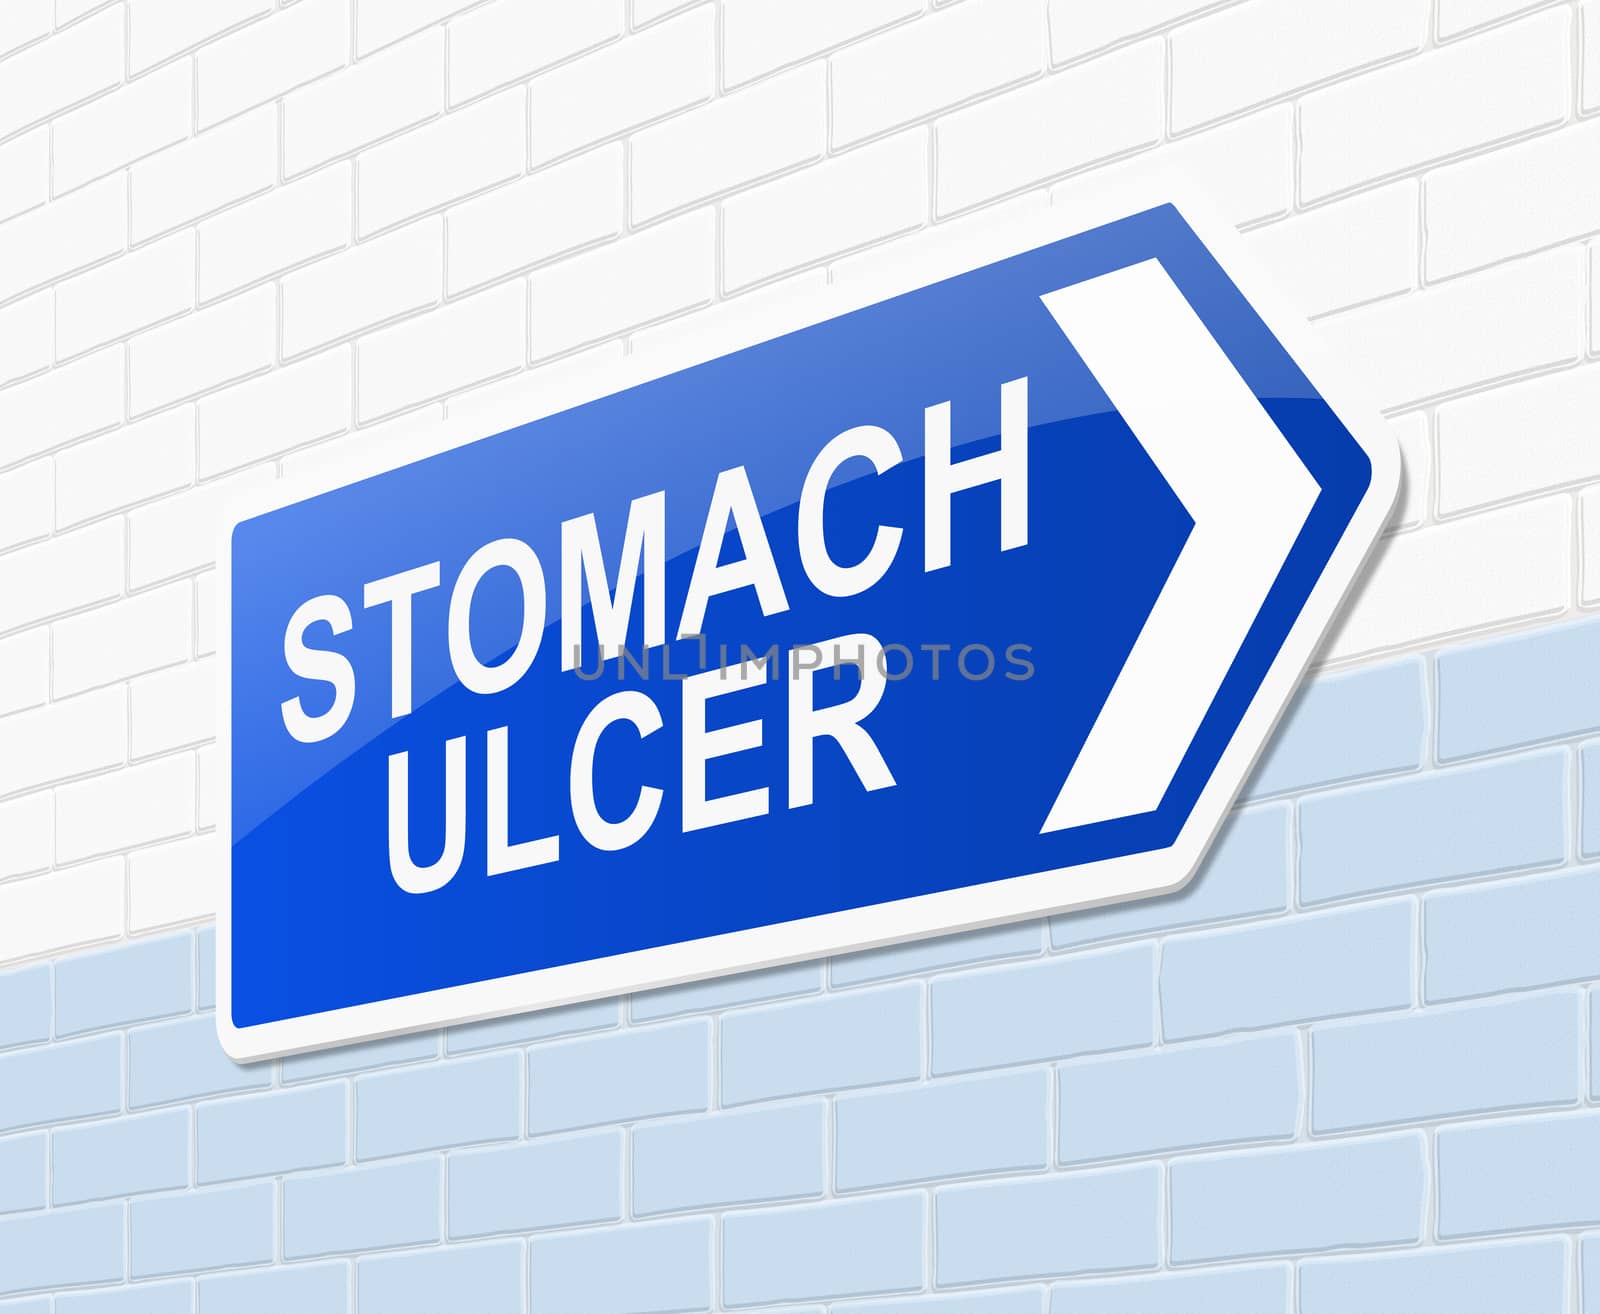 Illustration depicting a sign with a stomach ulcer concept.